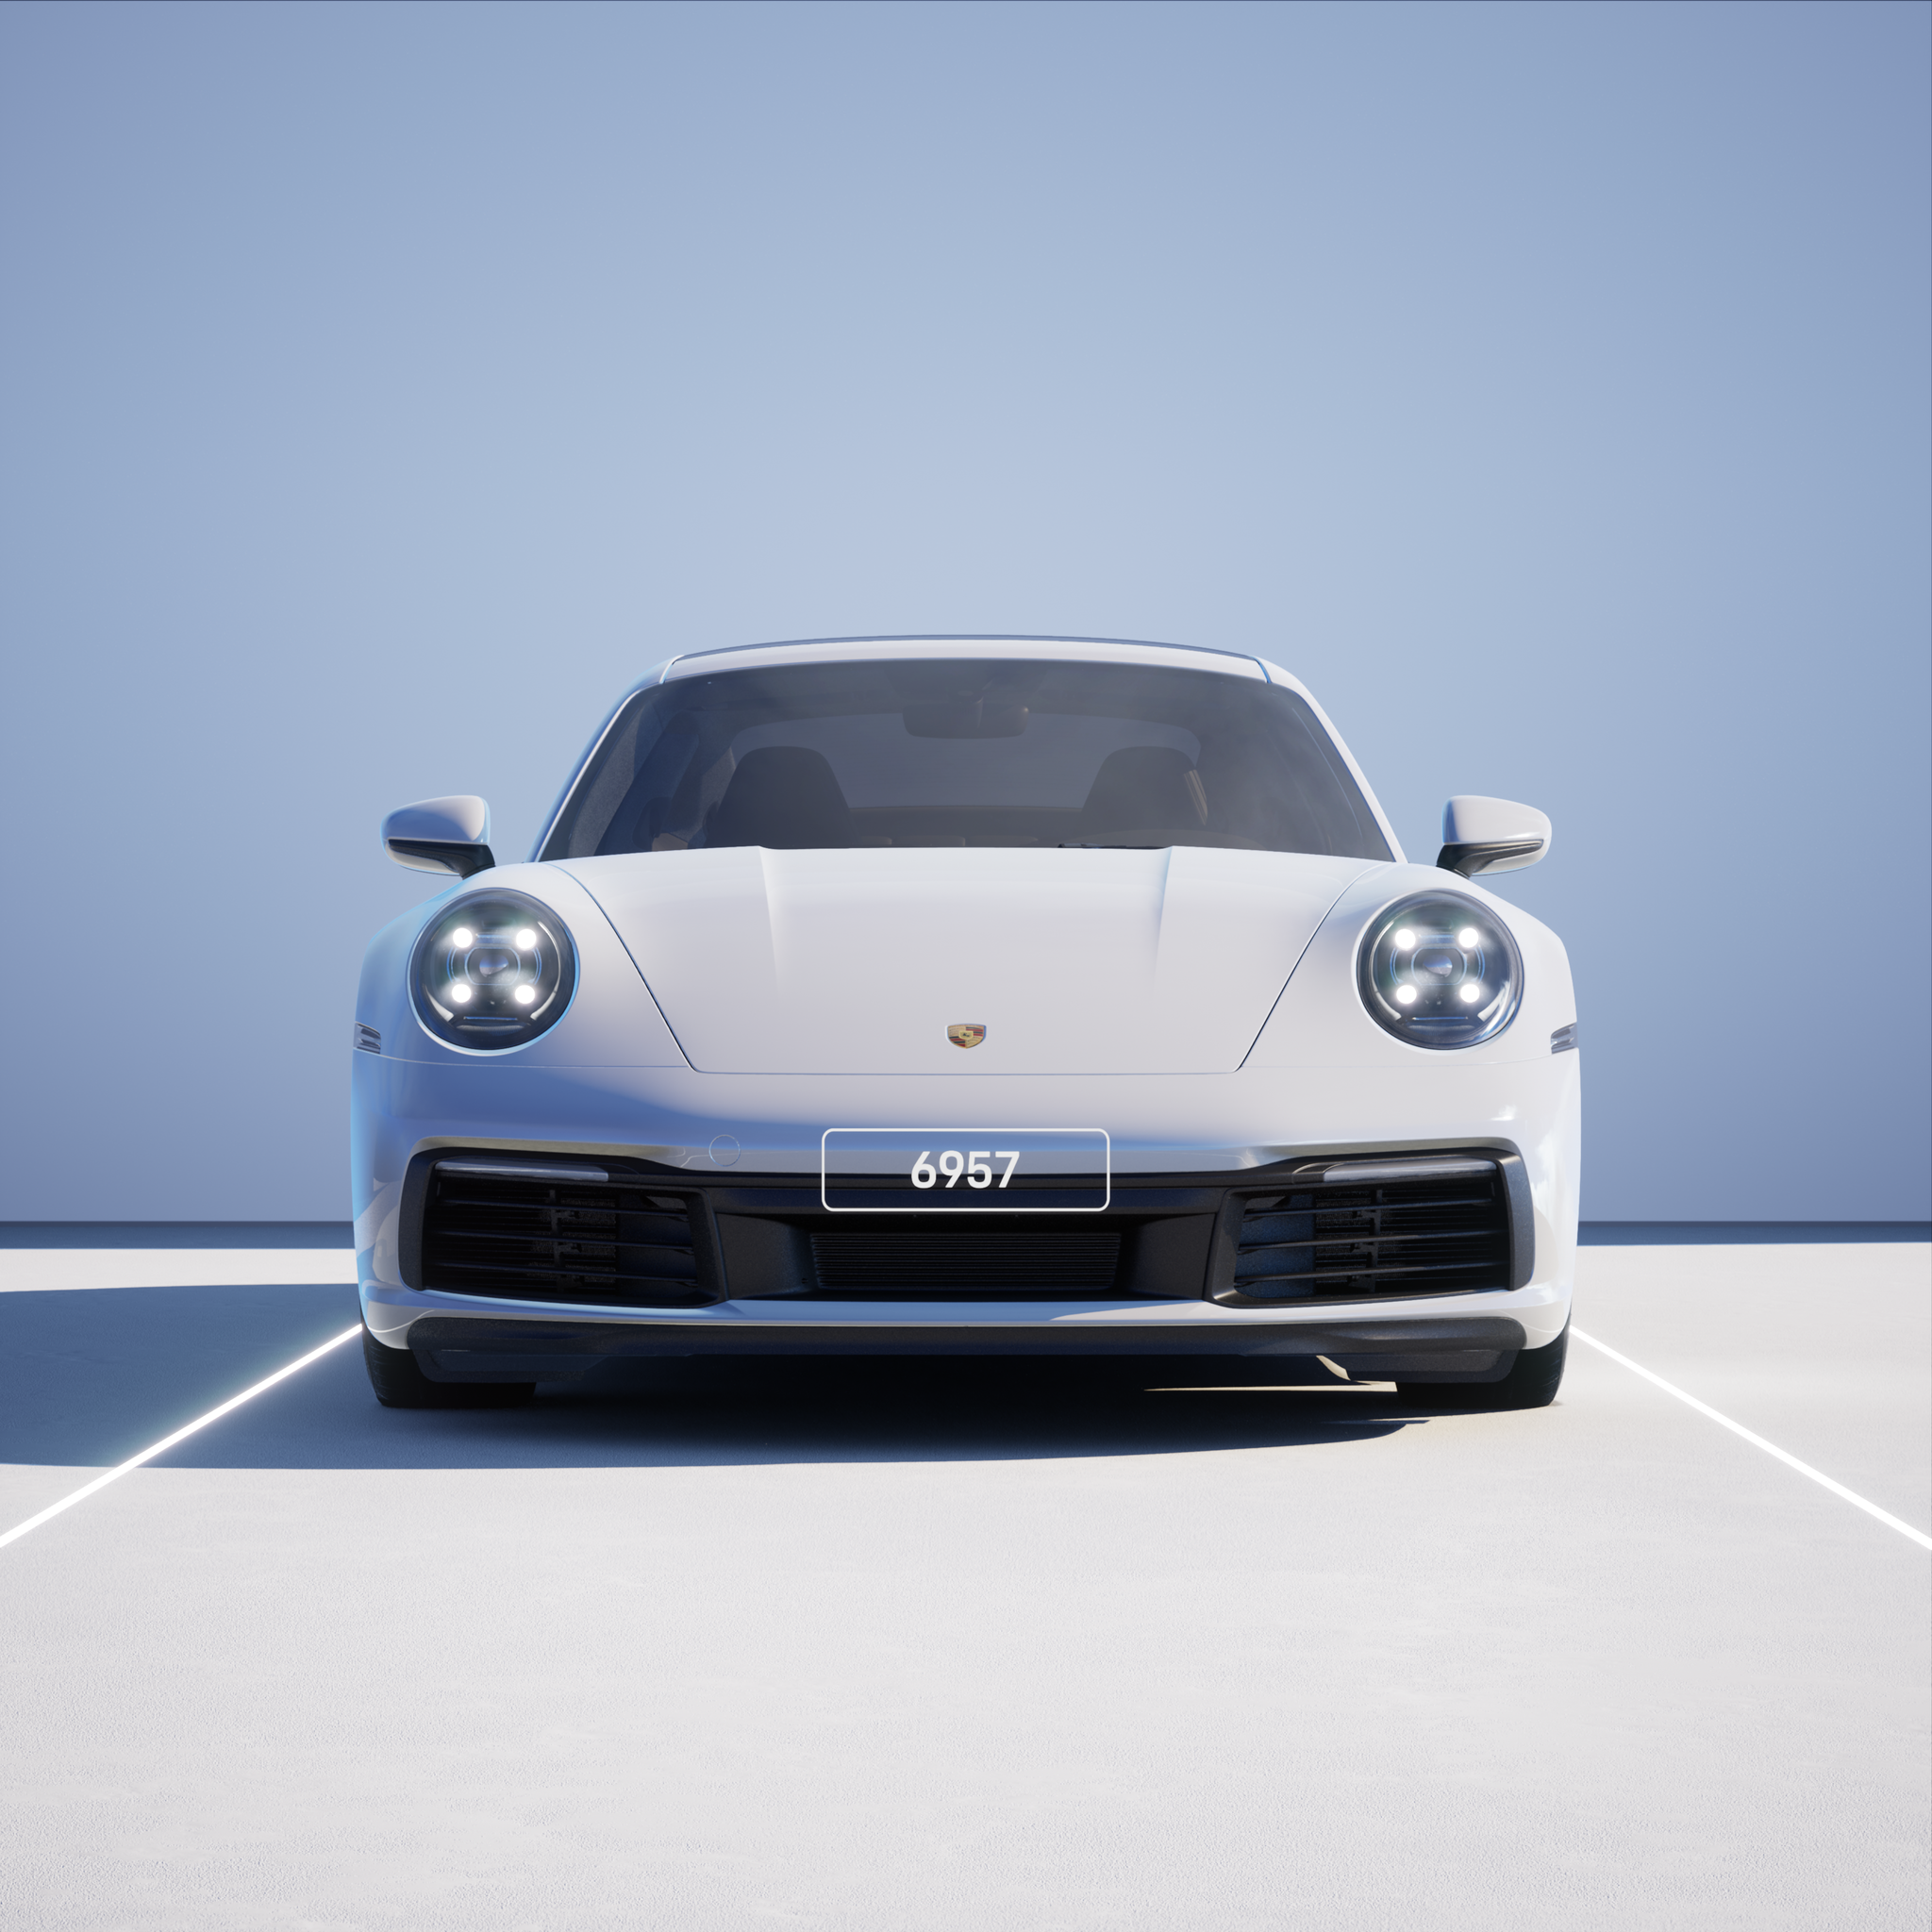 The PORSCHΞ 911 6957 image in phase